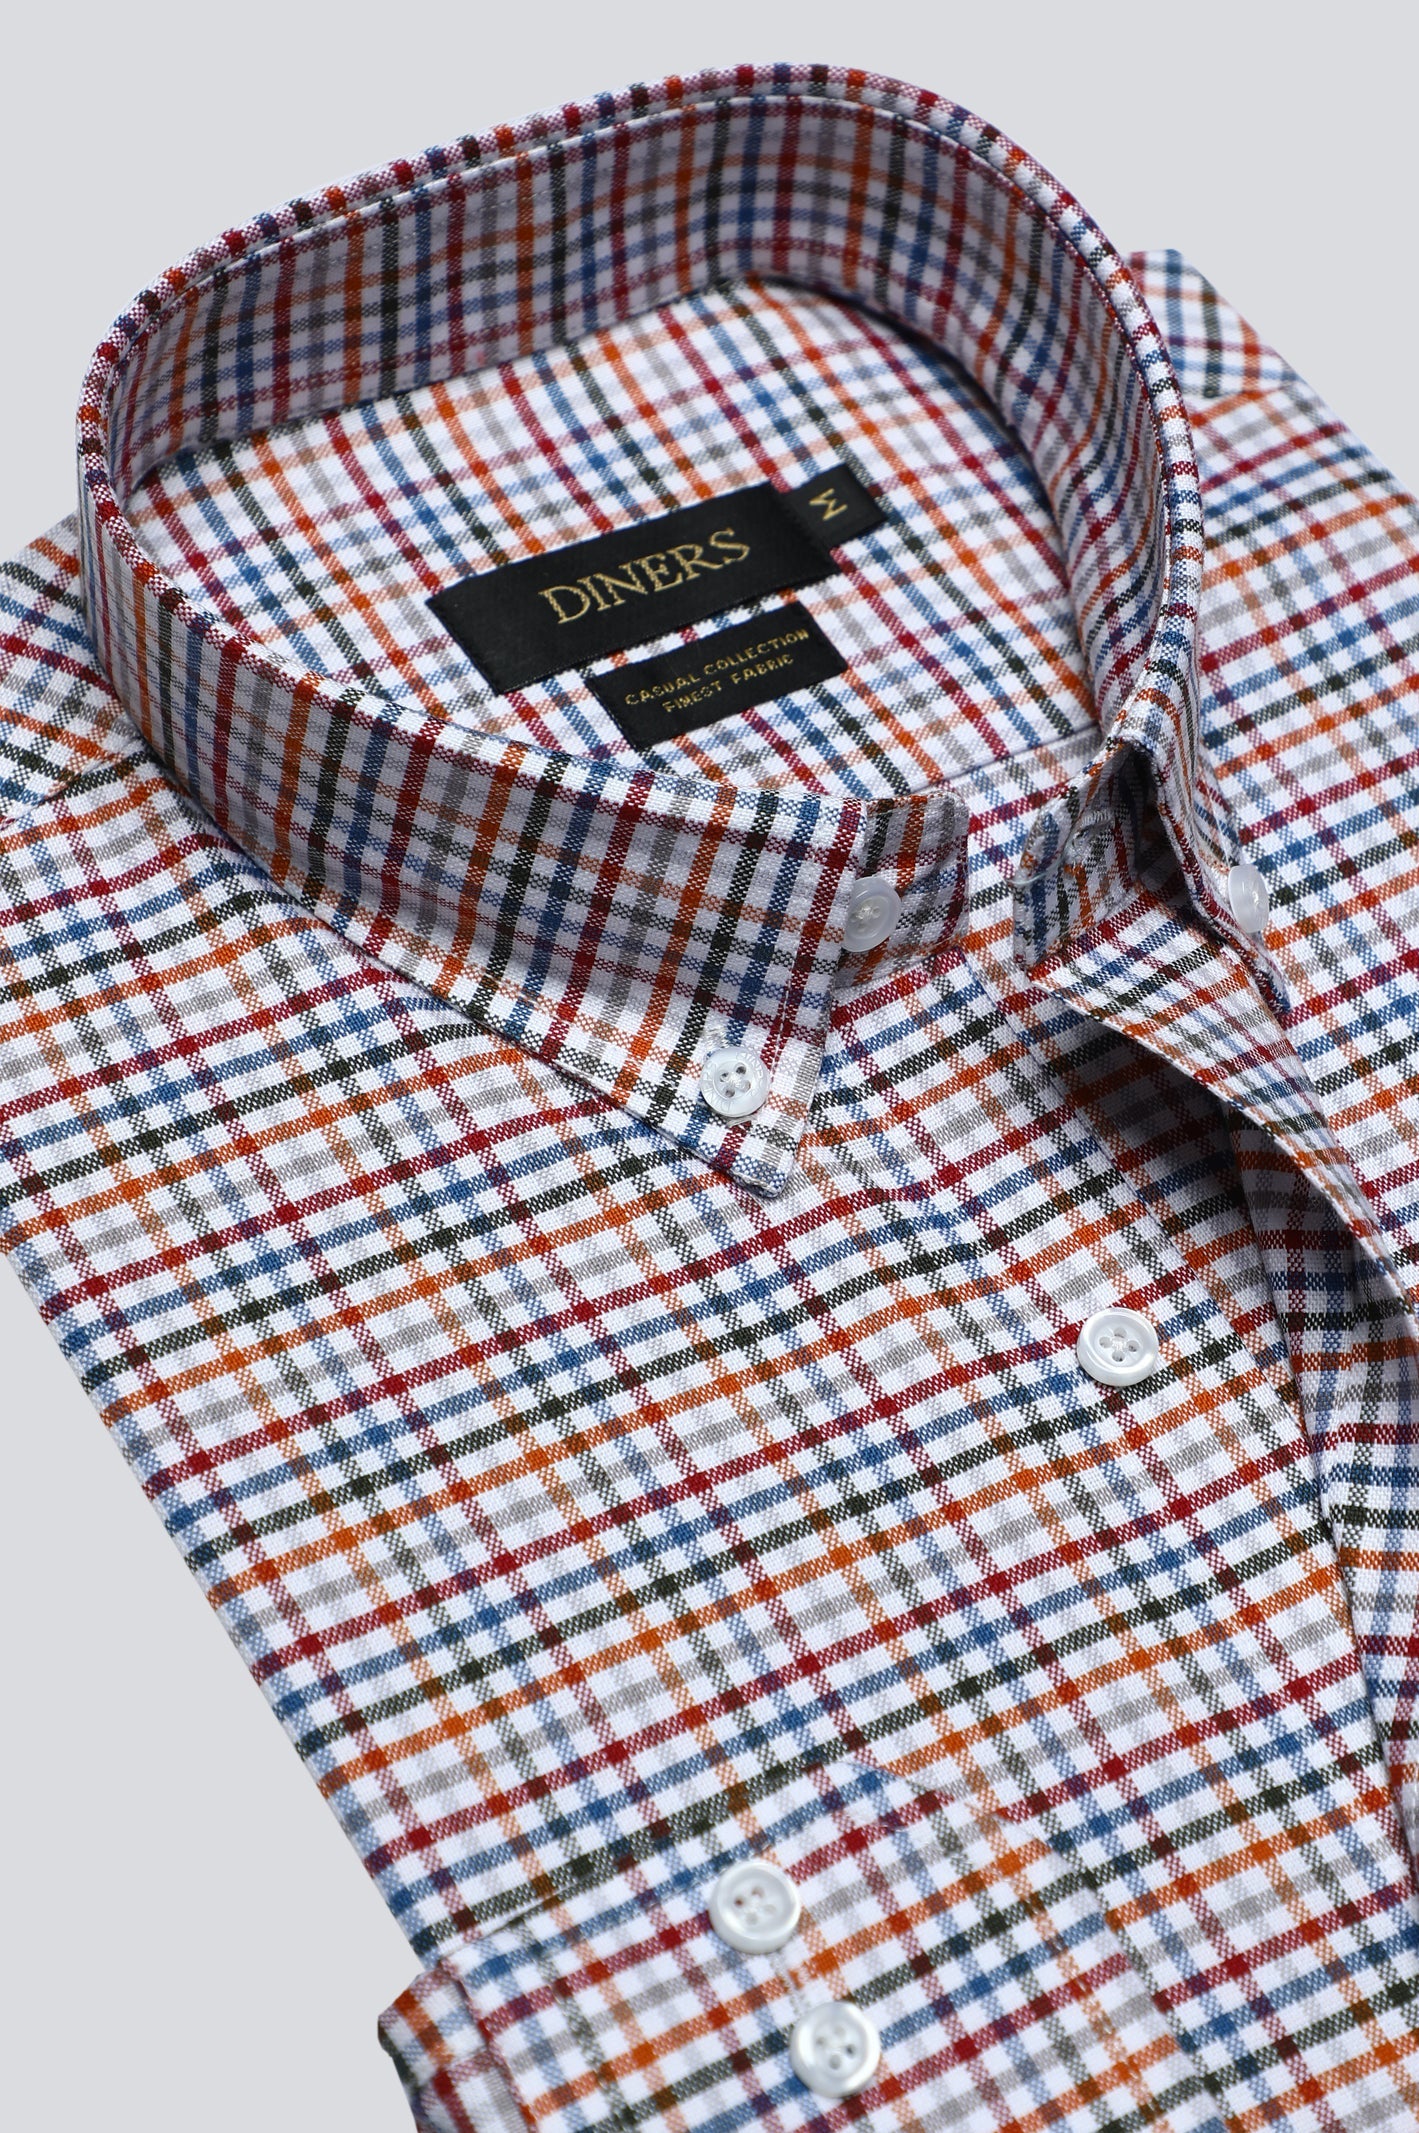 Multicolor Tattersall Check Casual Shirt for Men - Diners